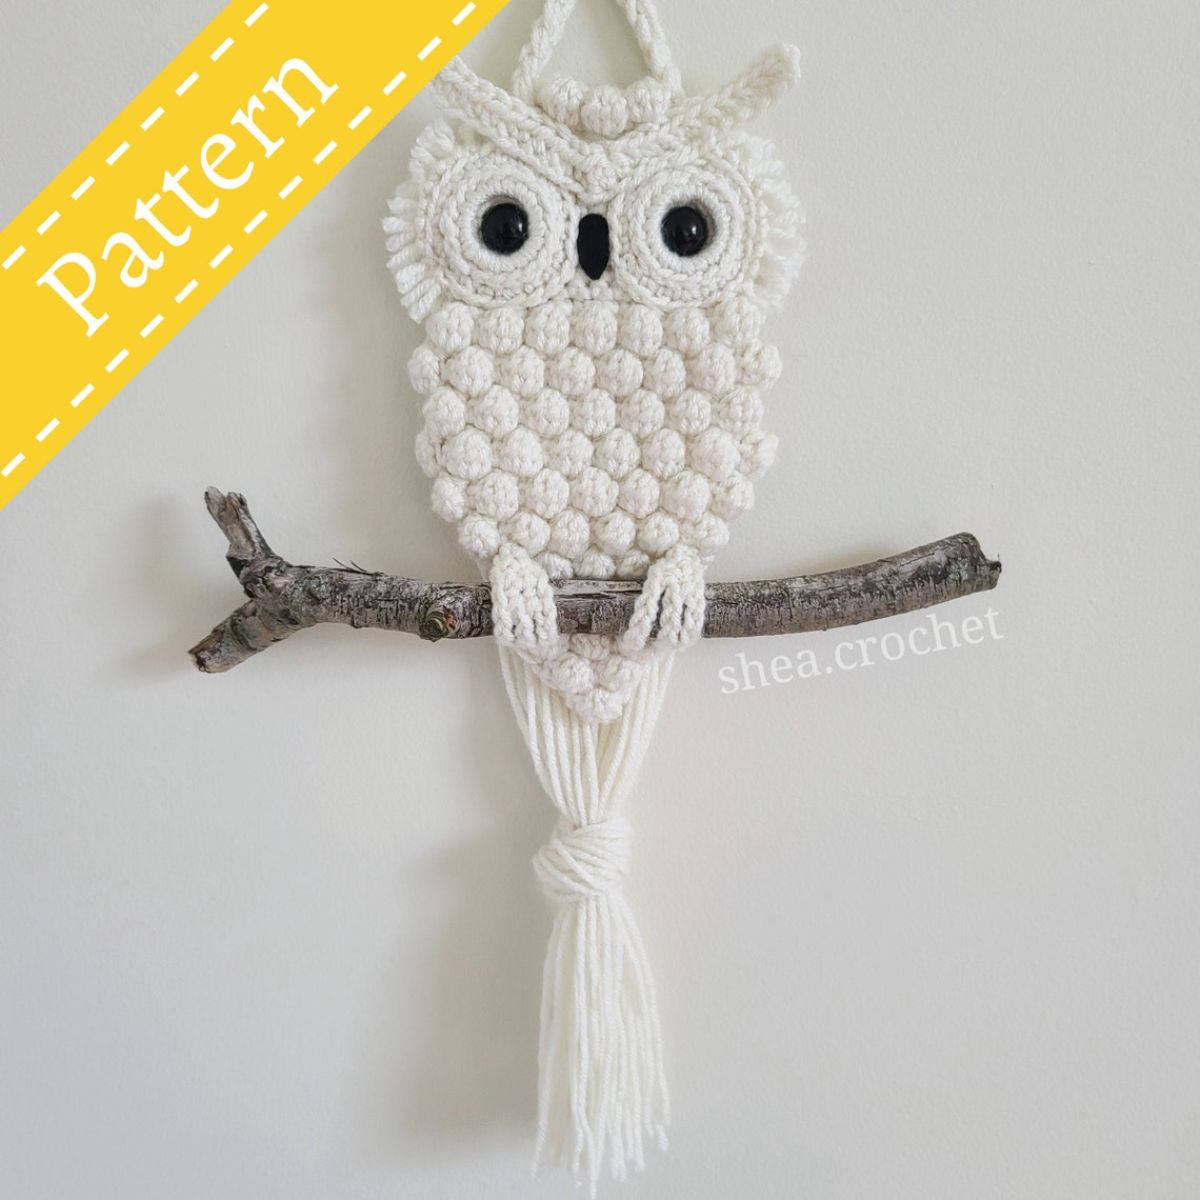 White crochet owl wall hanging with black eyes standing on a branch with long white tassels hanging down from the owl’s feet.